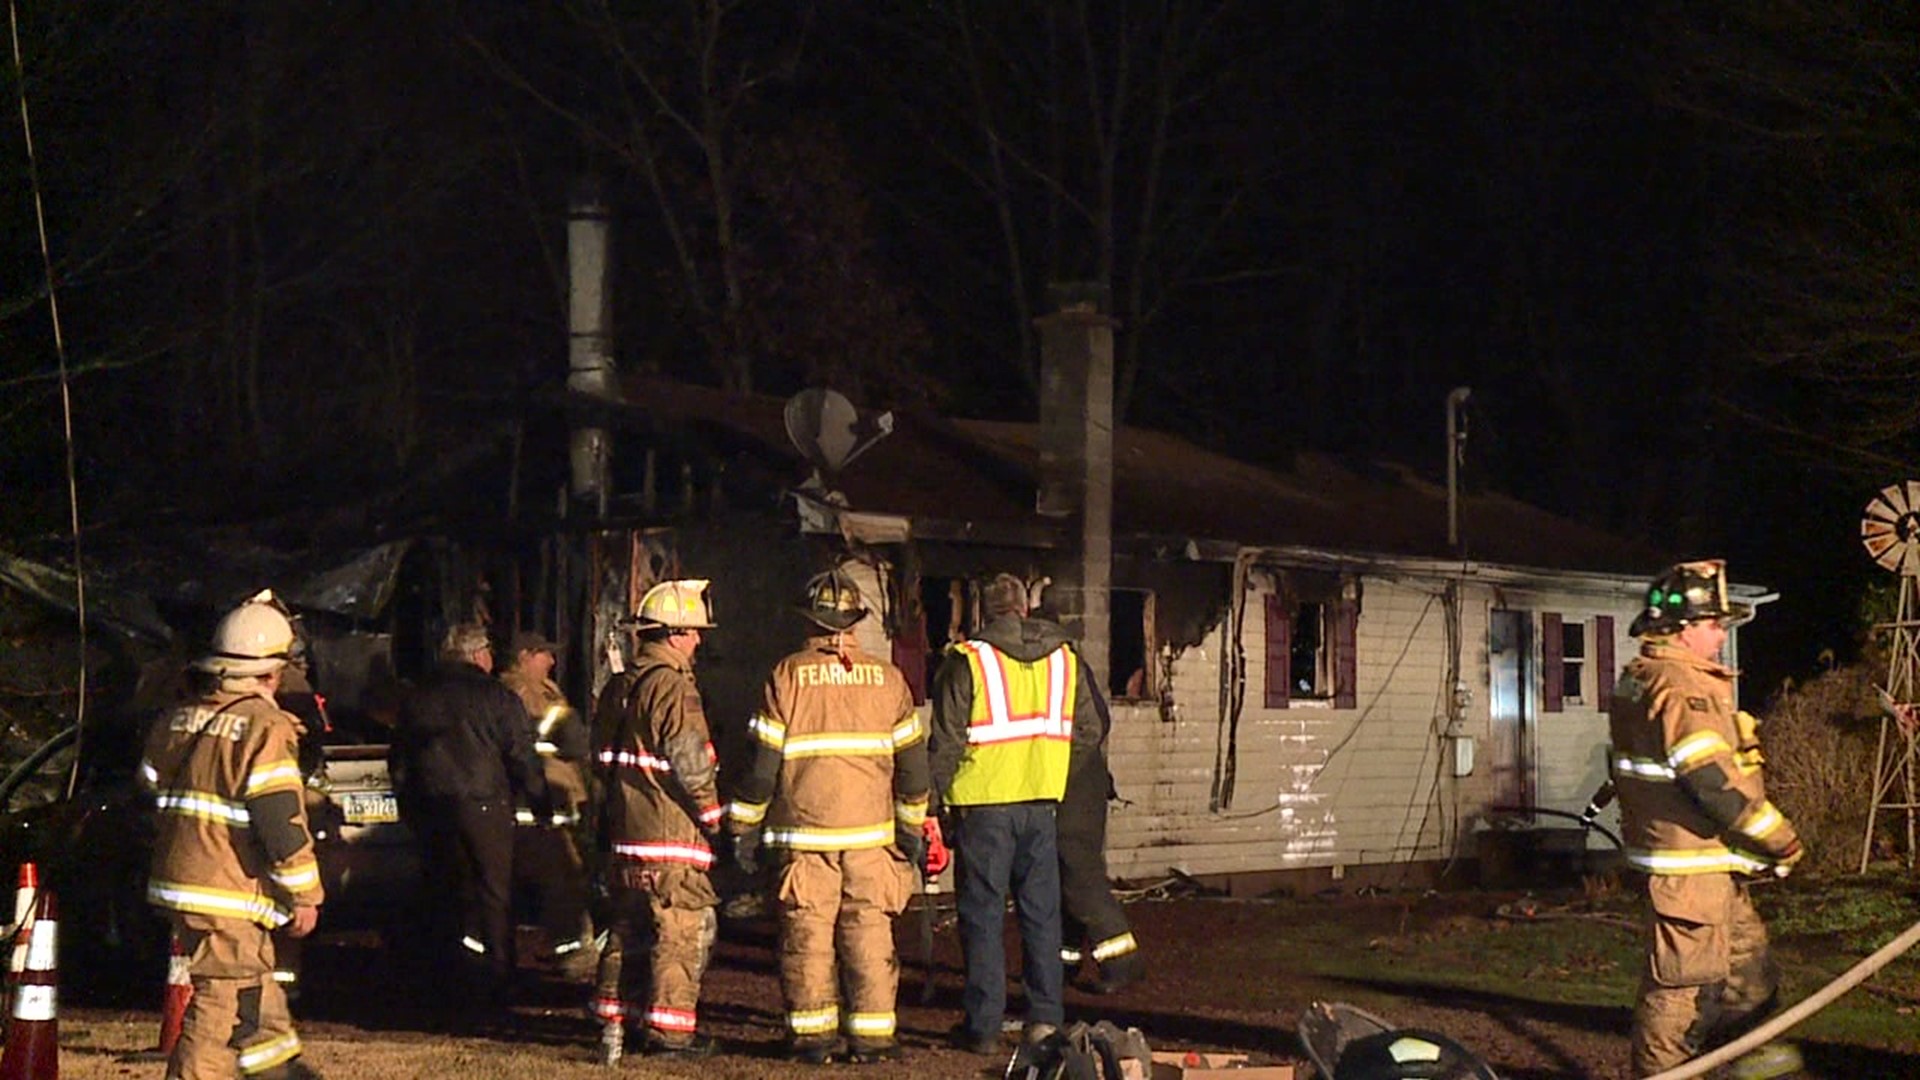 A fire broke out at a home along Medvitz Lane in Foster Township.